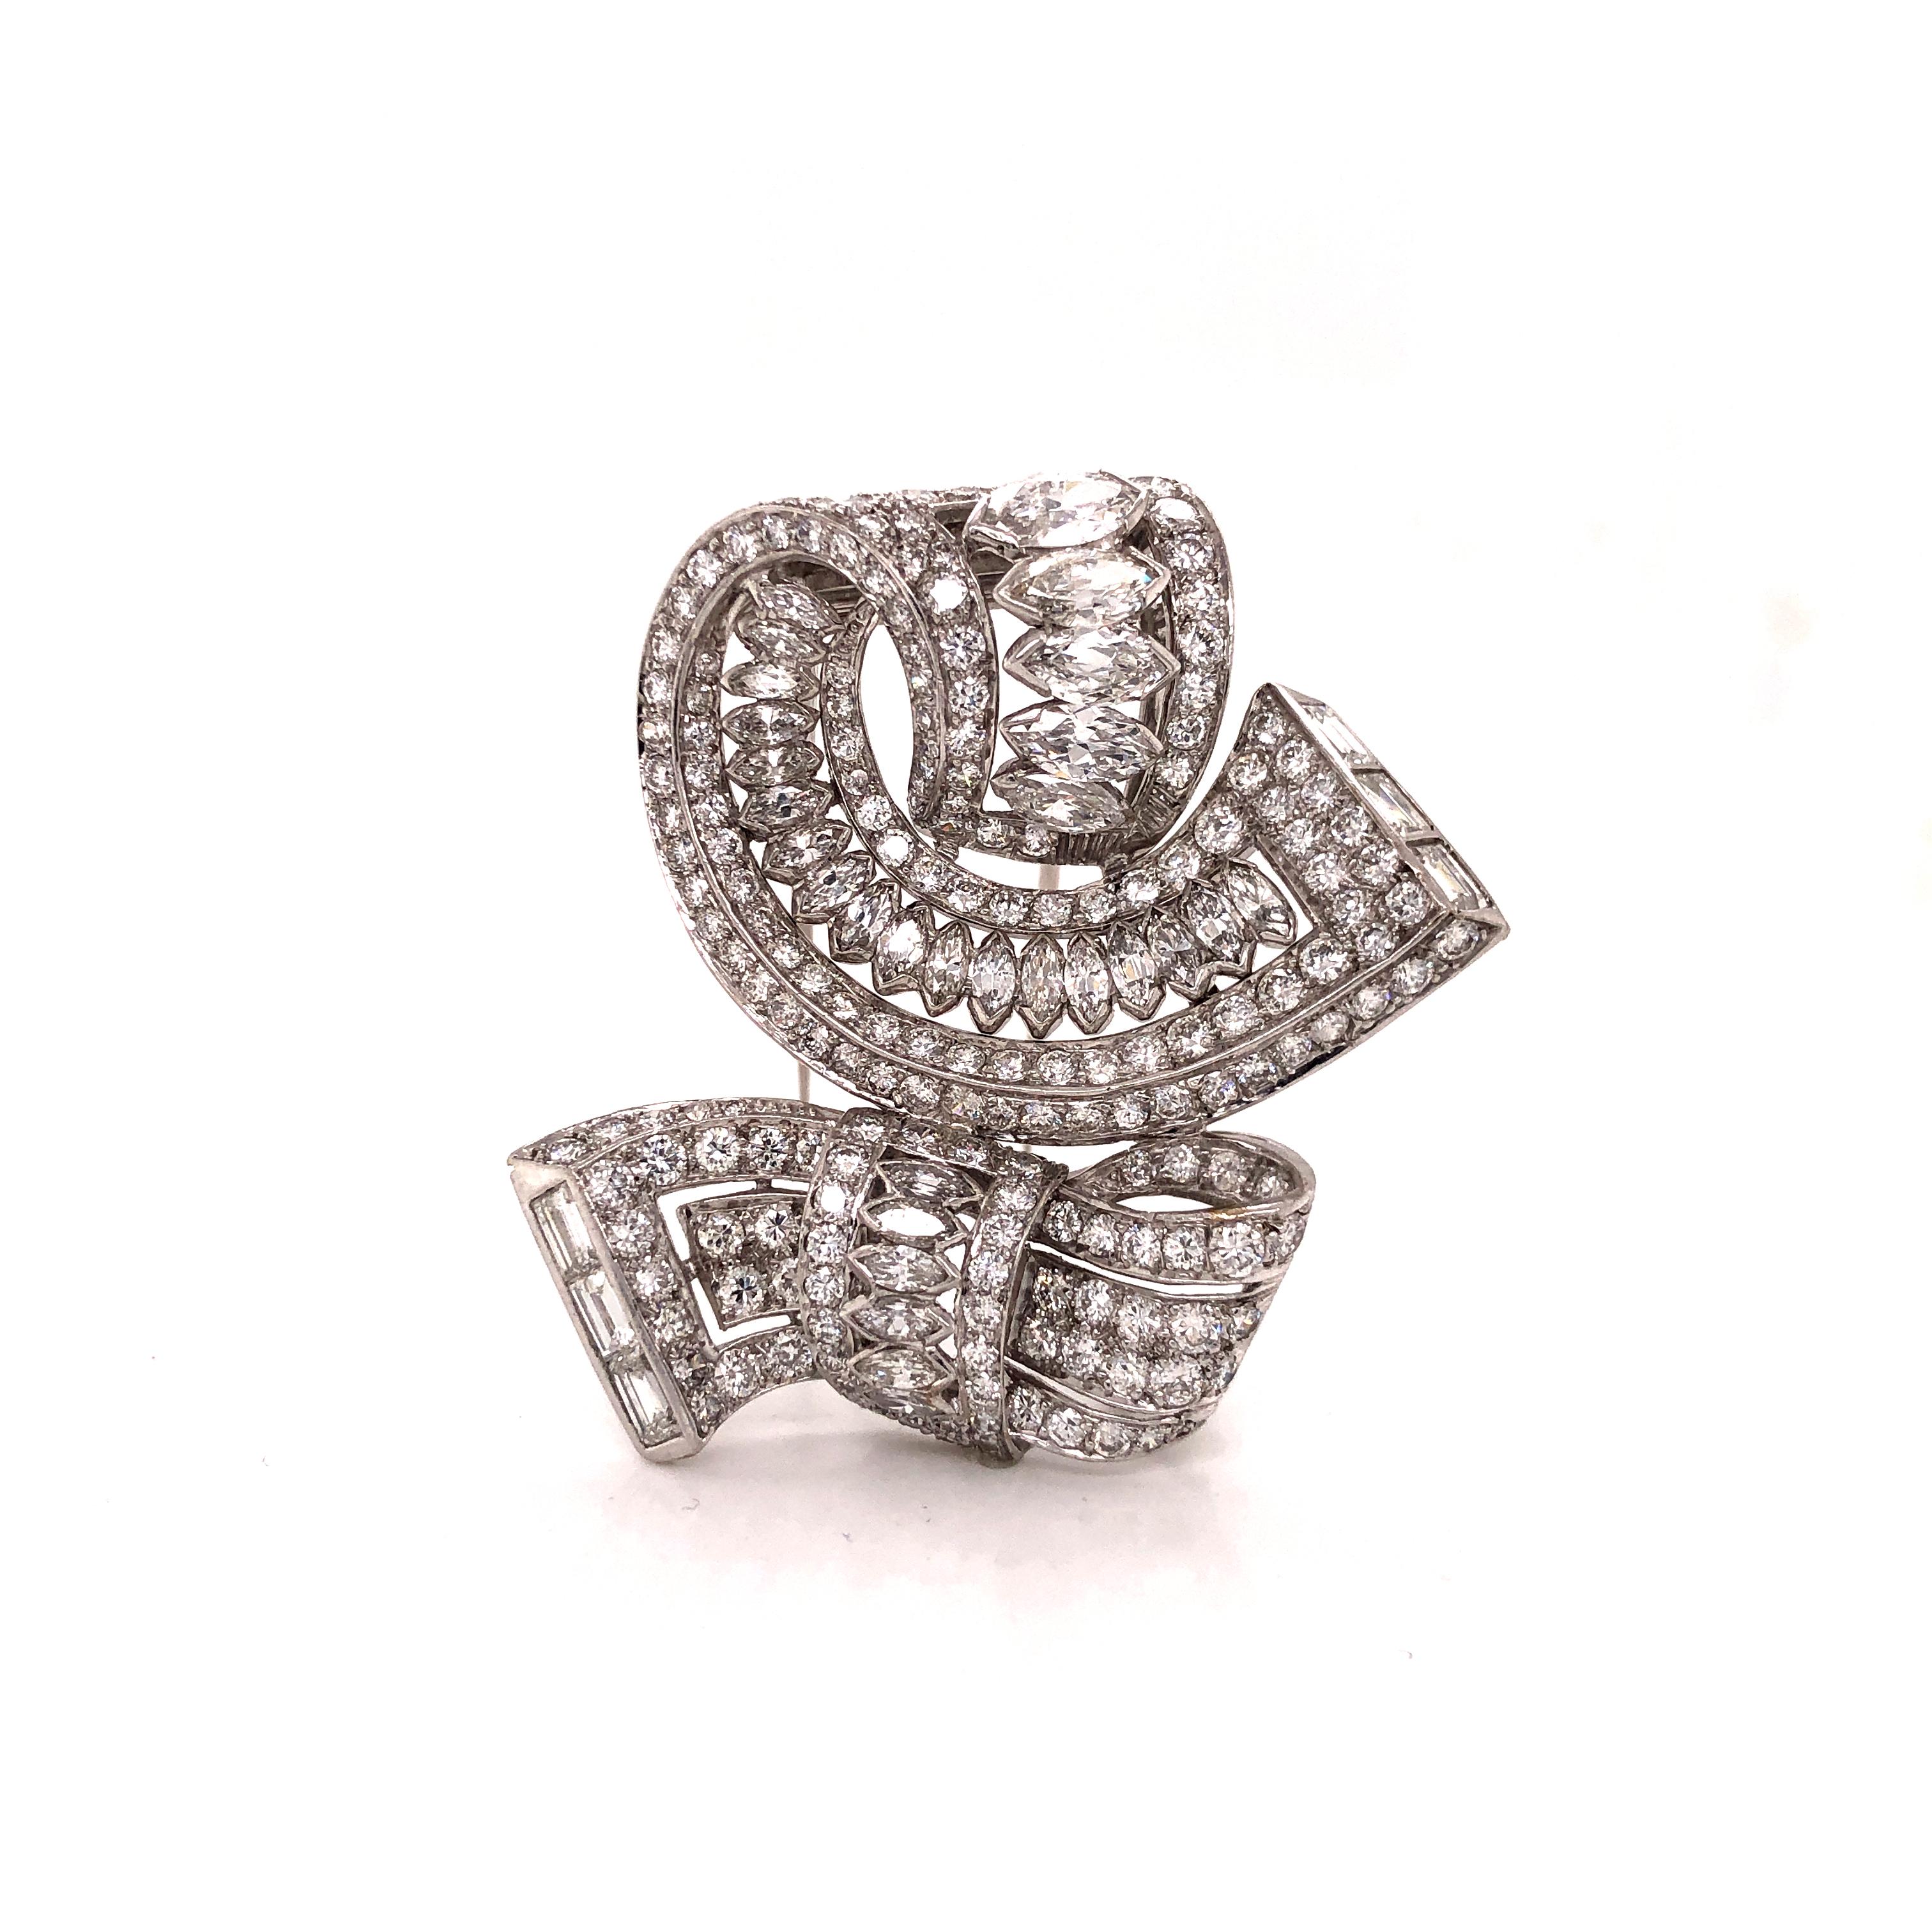 One of a kind diamond brooch crafted in platinum. This brooch is stunning. Swooping sharp angles are seen as this pin was hand crafted by true masters of the time. Art Deco styled this brooch was crafted in the 1940's. Approximately 15.00 carats are